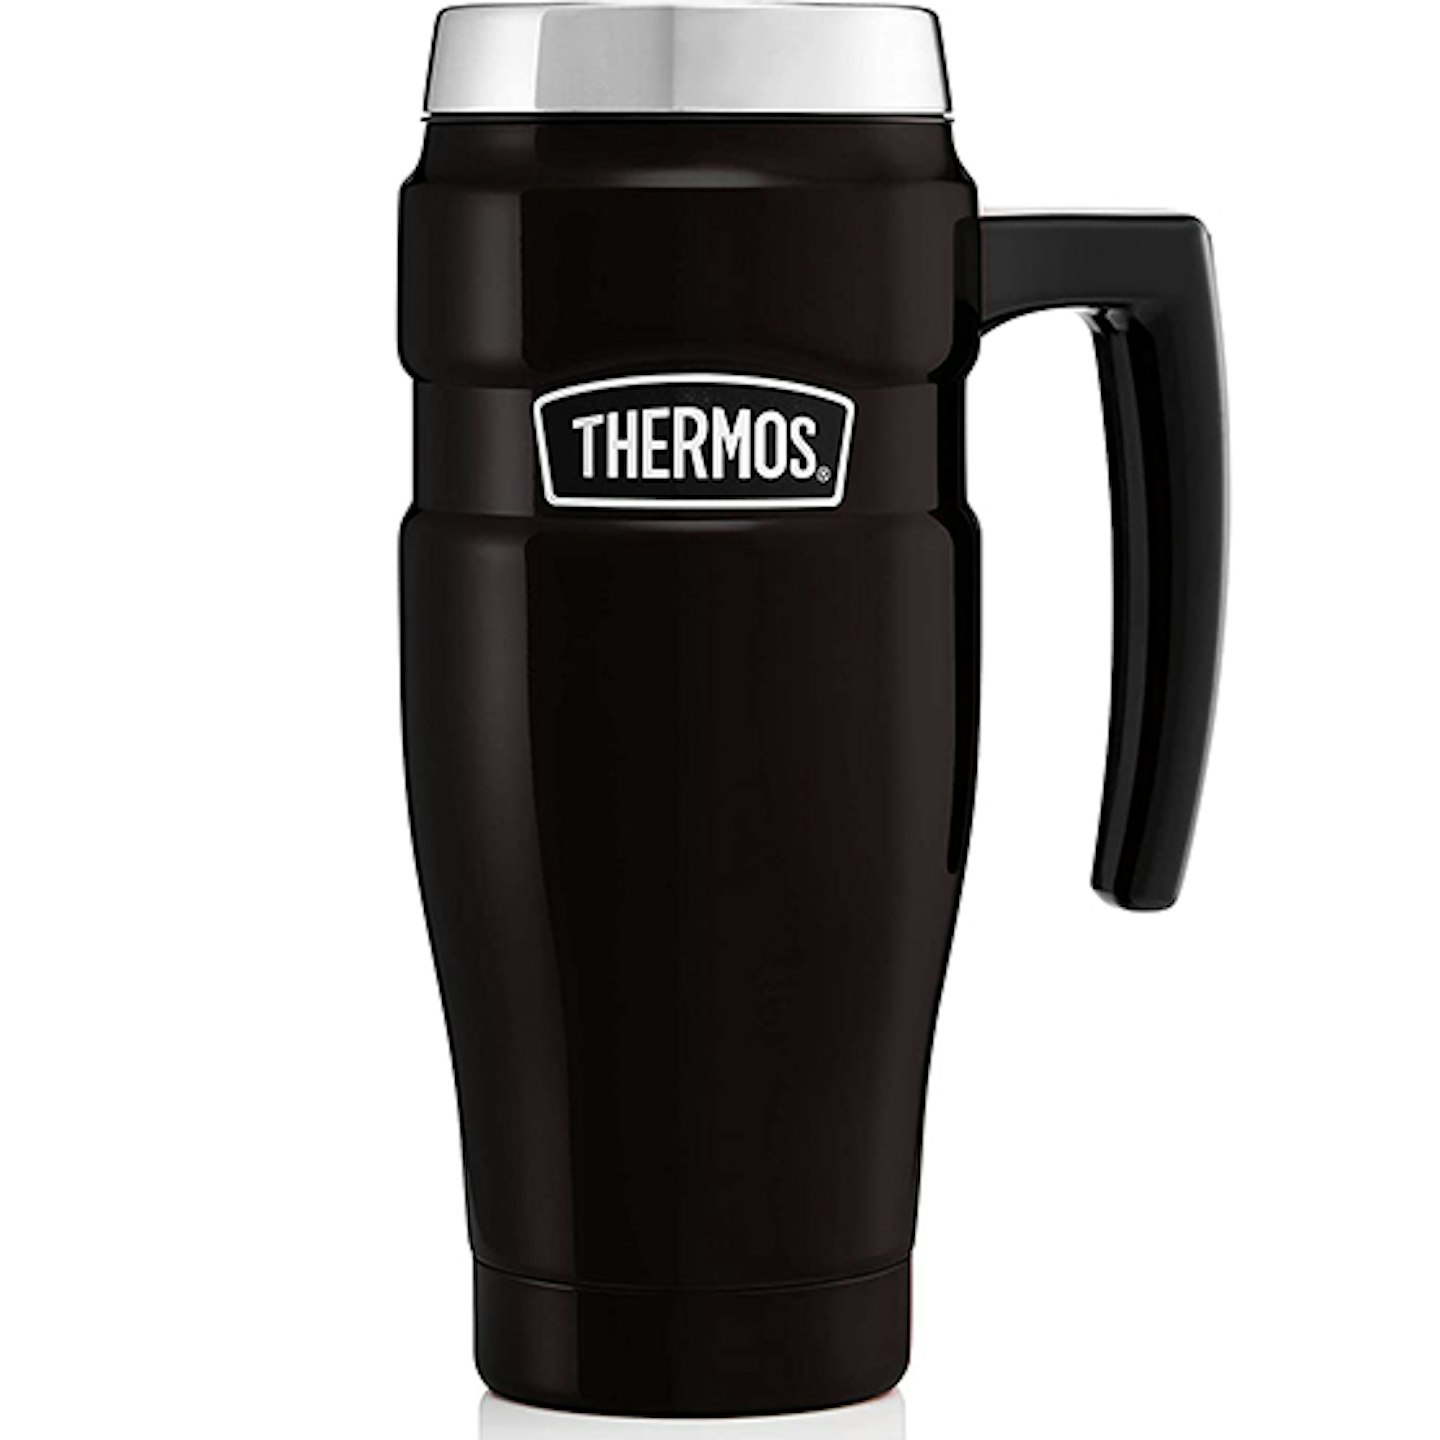 Thermos reusable coffee cup